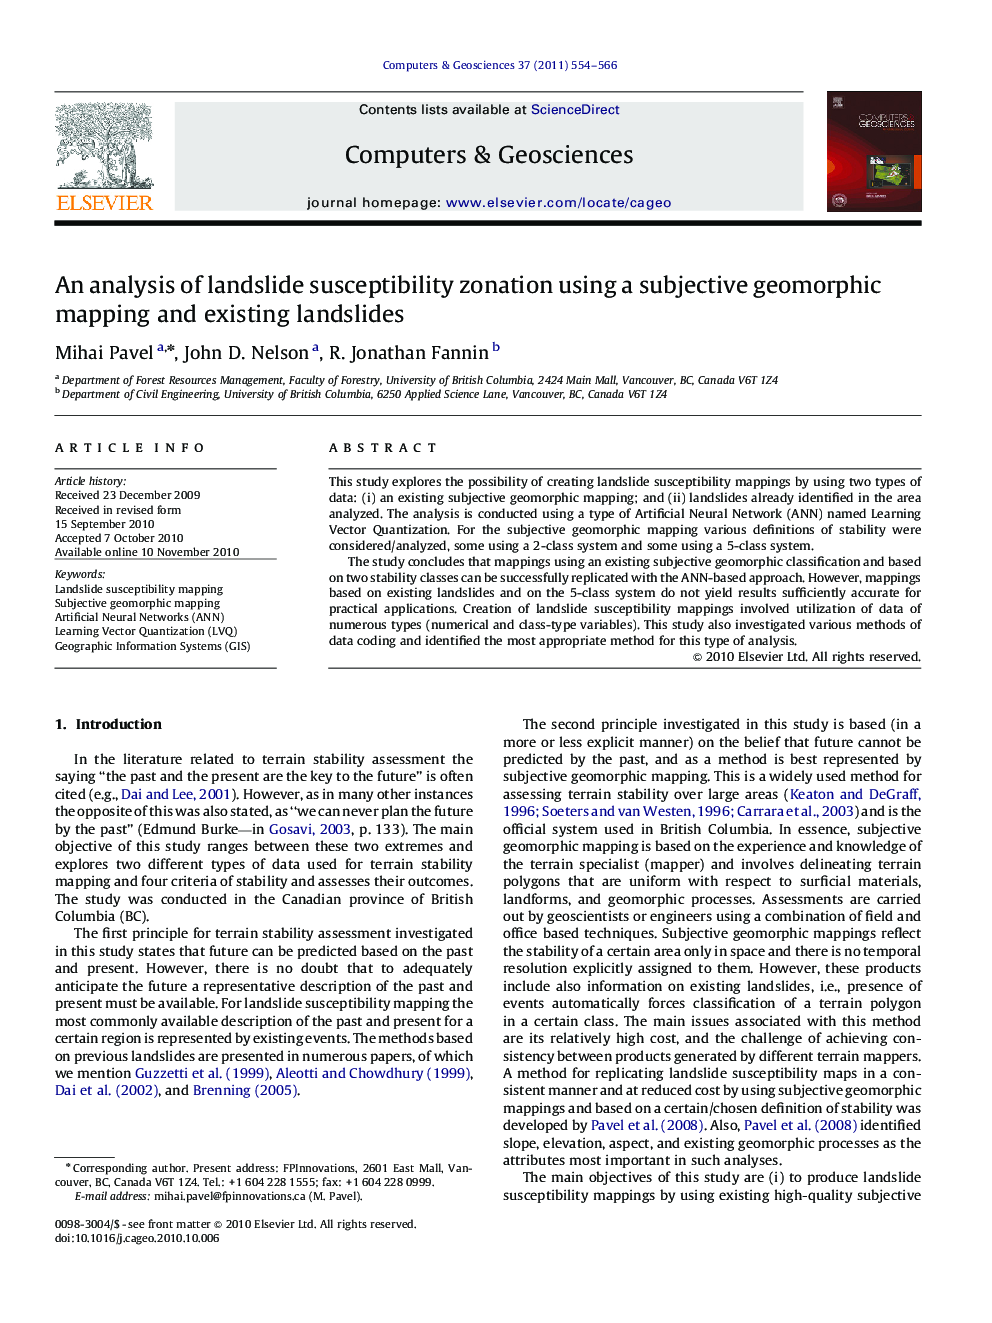 An analysis of landslide susceptibility zonation using a subjective geomorphic mapping and existing landslides